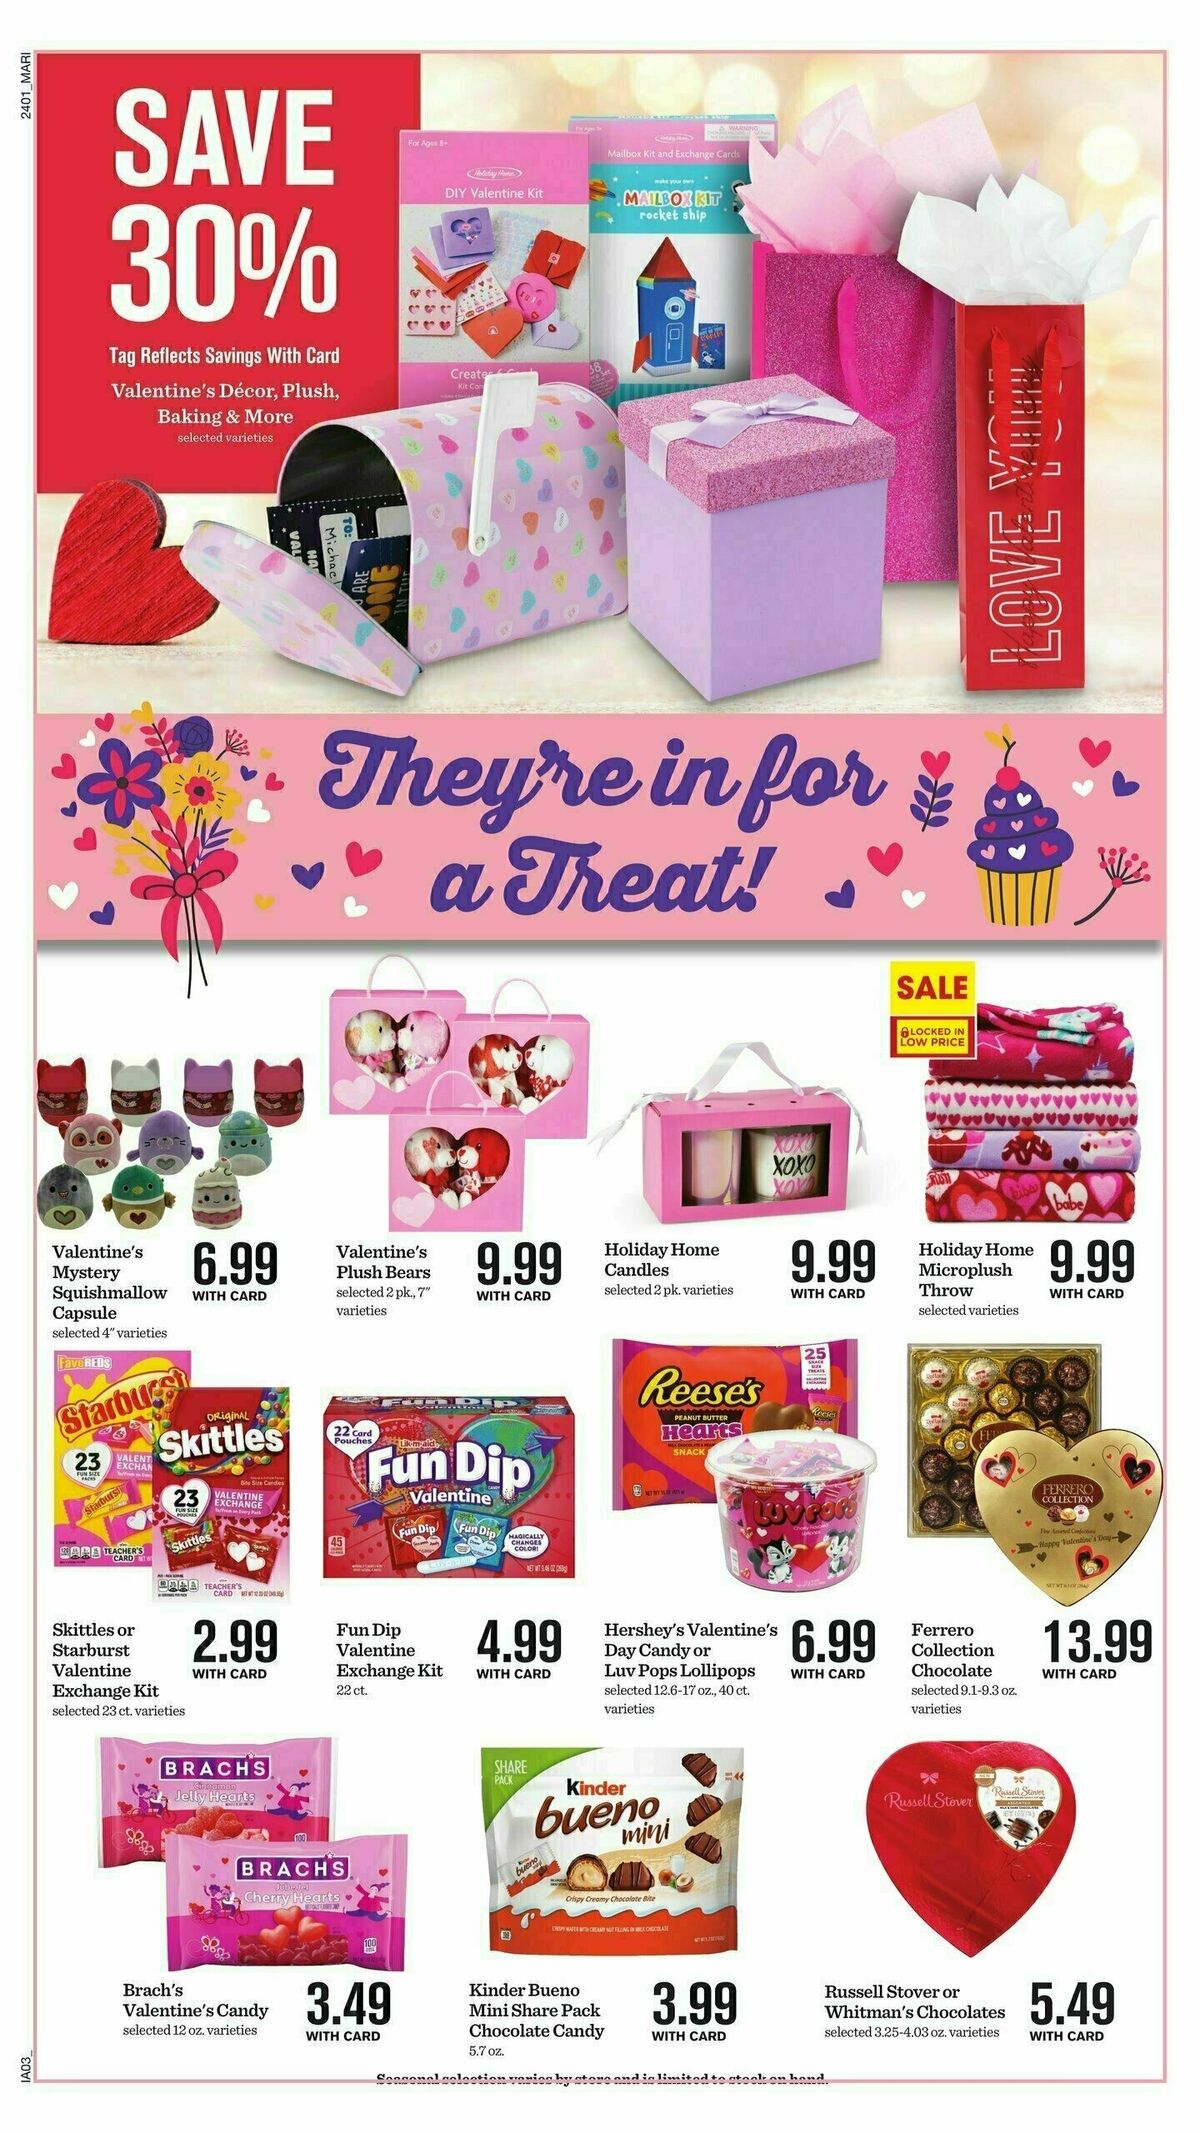 Mariano's Weekly Ad from February 7